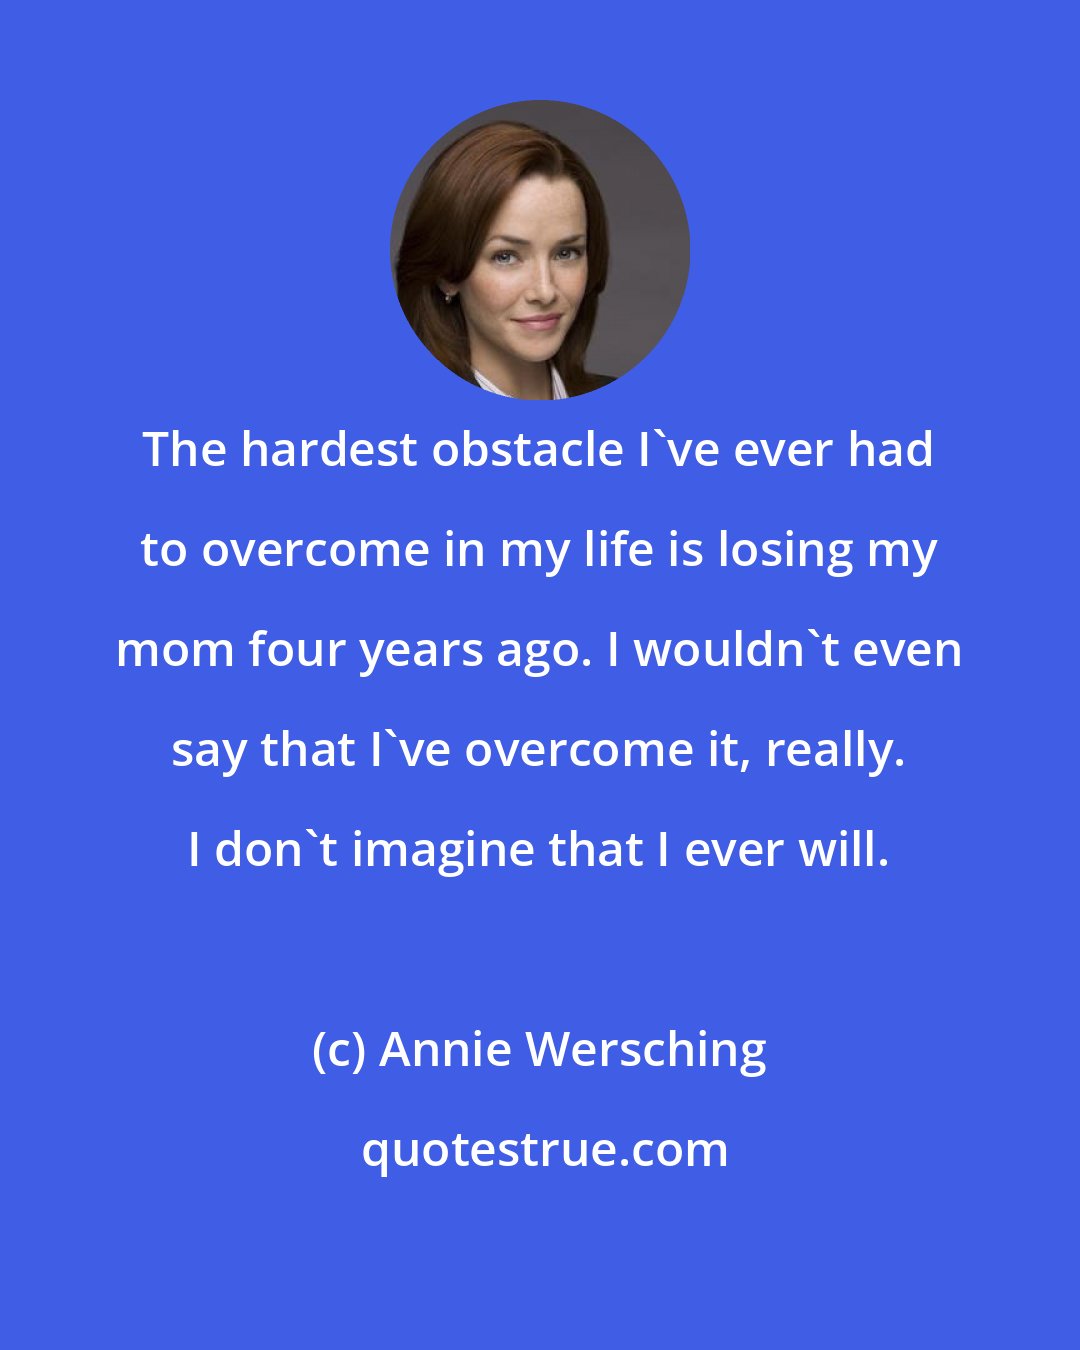 Annie Wersching: The hardest obstacle I've ever had to overcome in my life is losing my mom four years ago. I wouldn't even say that I've overcome it, really. I don't imagine that I ever will.